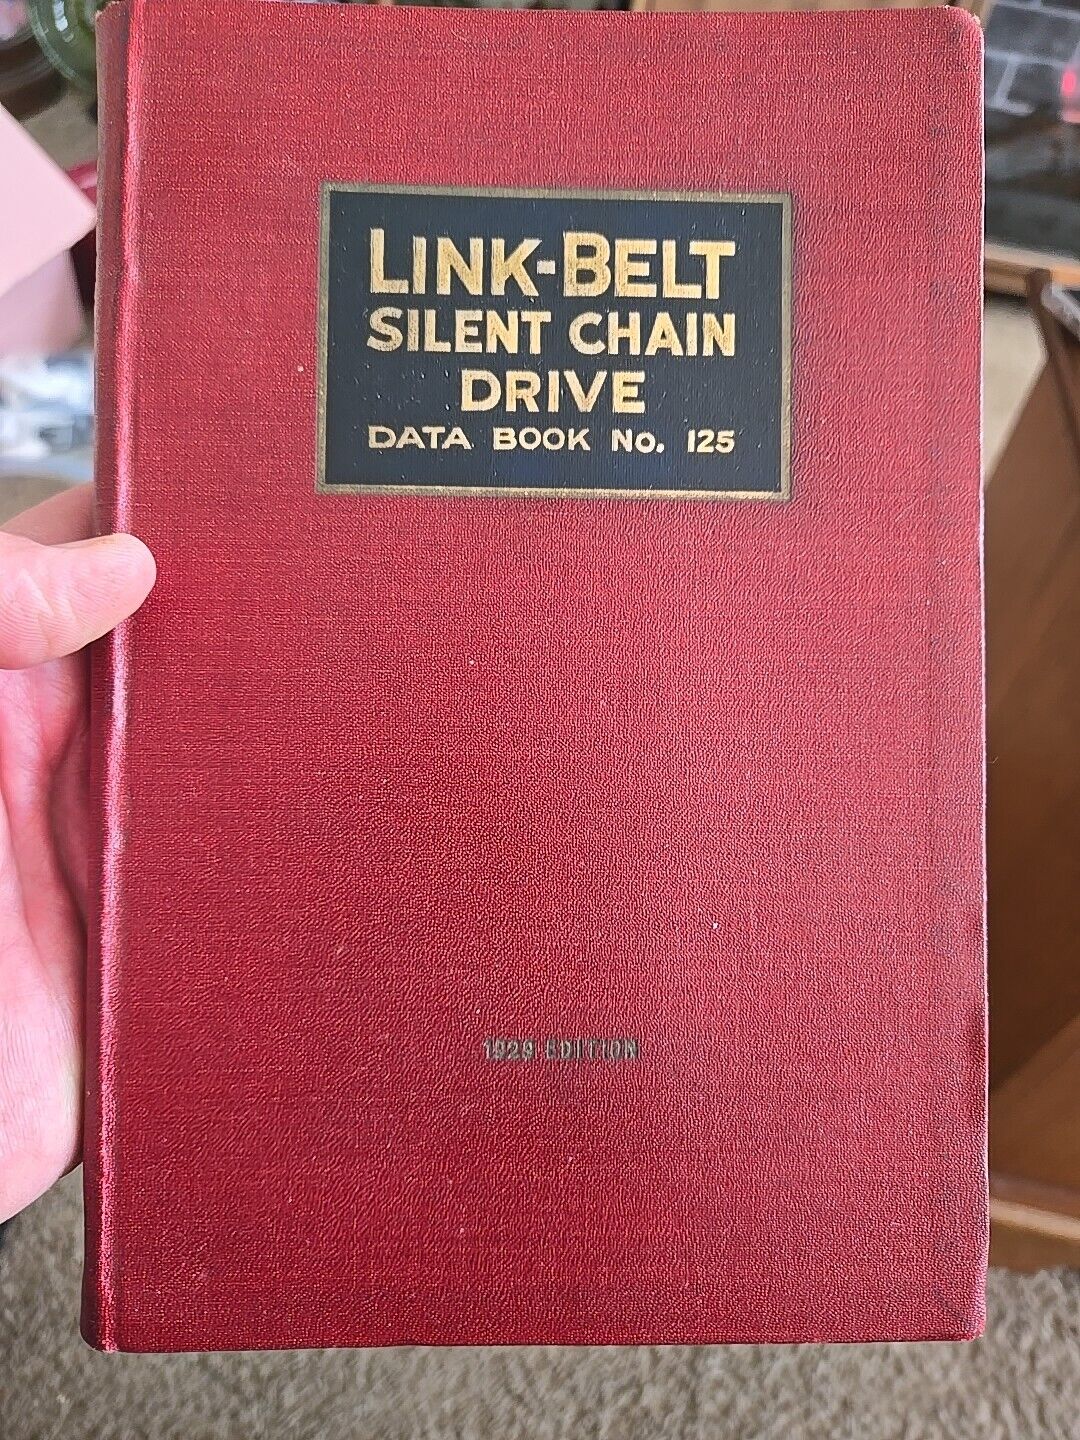 Antique Link - Belt Silent Chain Drive Data Book No. 125 Dated 1929